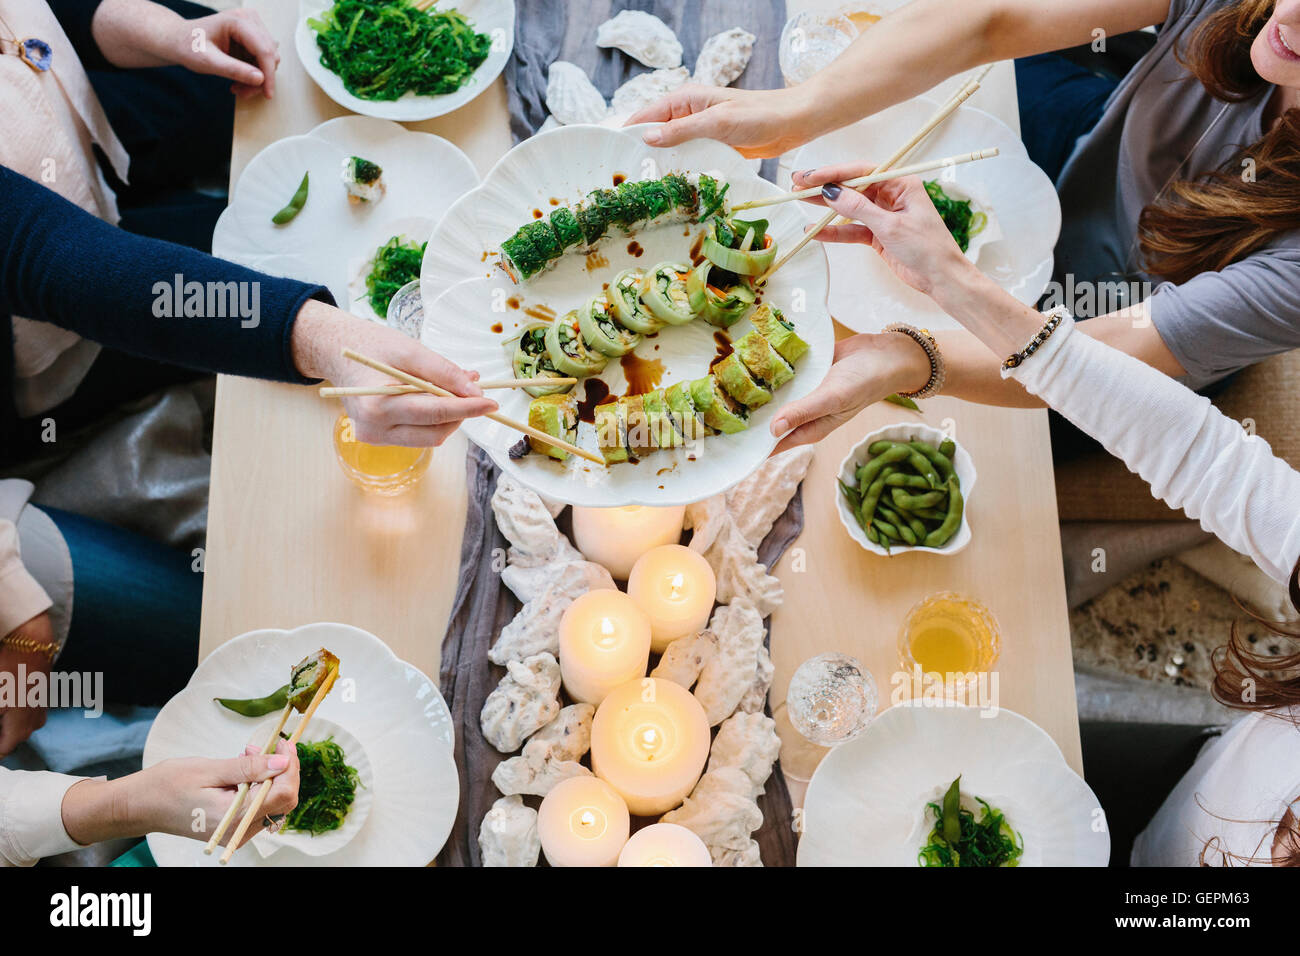 Overhead view of four people sharing a meal, plates of sushi and a table setting for a celebration meal. Stock Photo